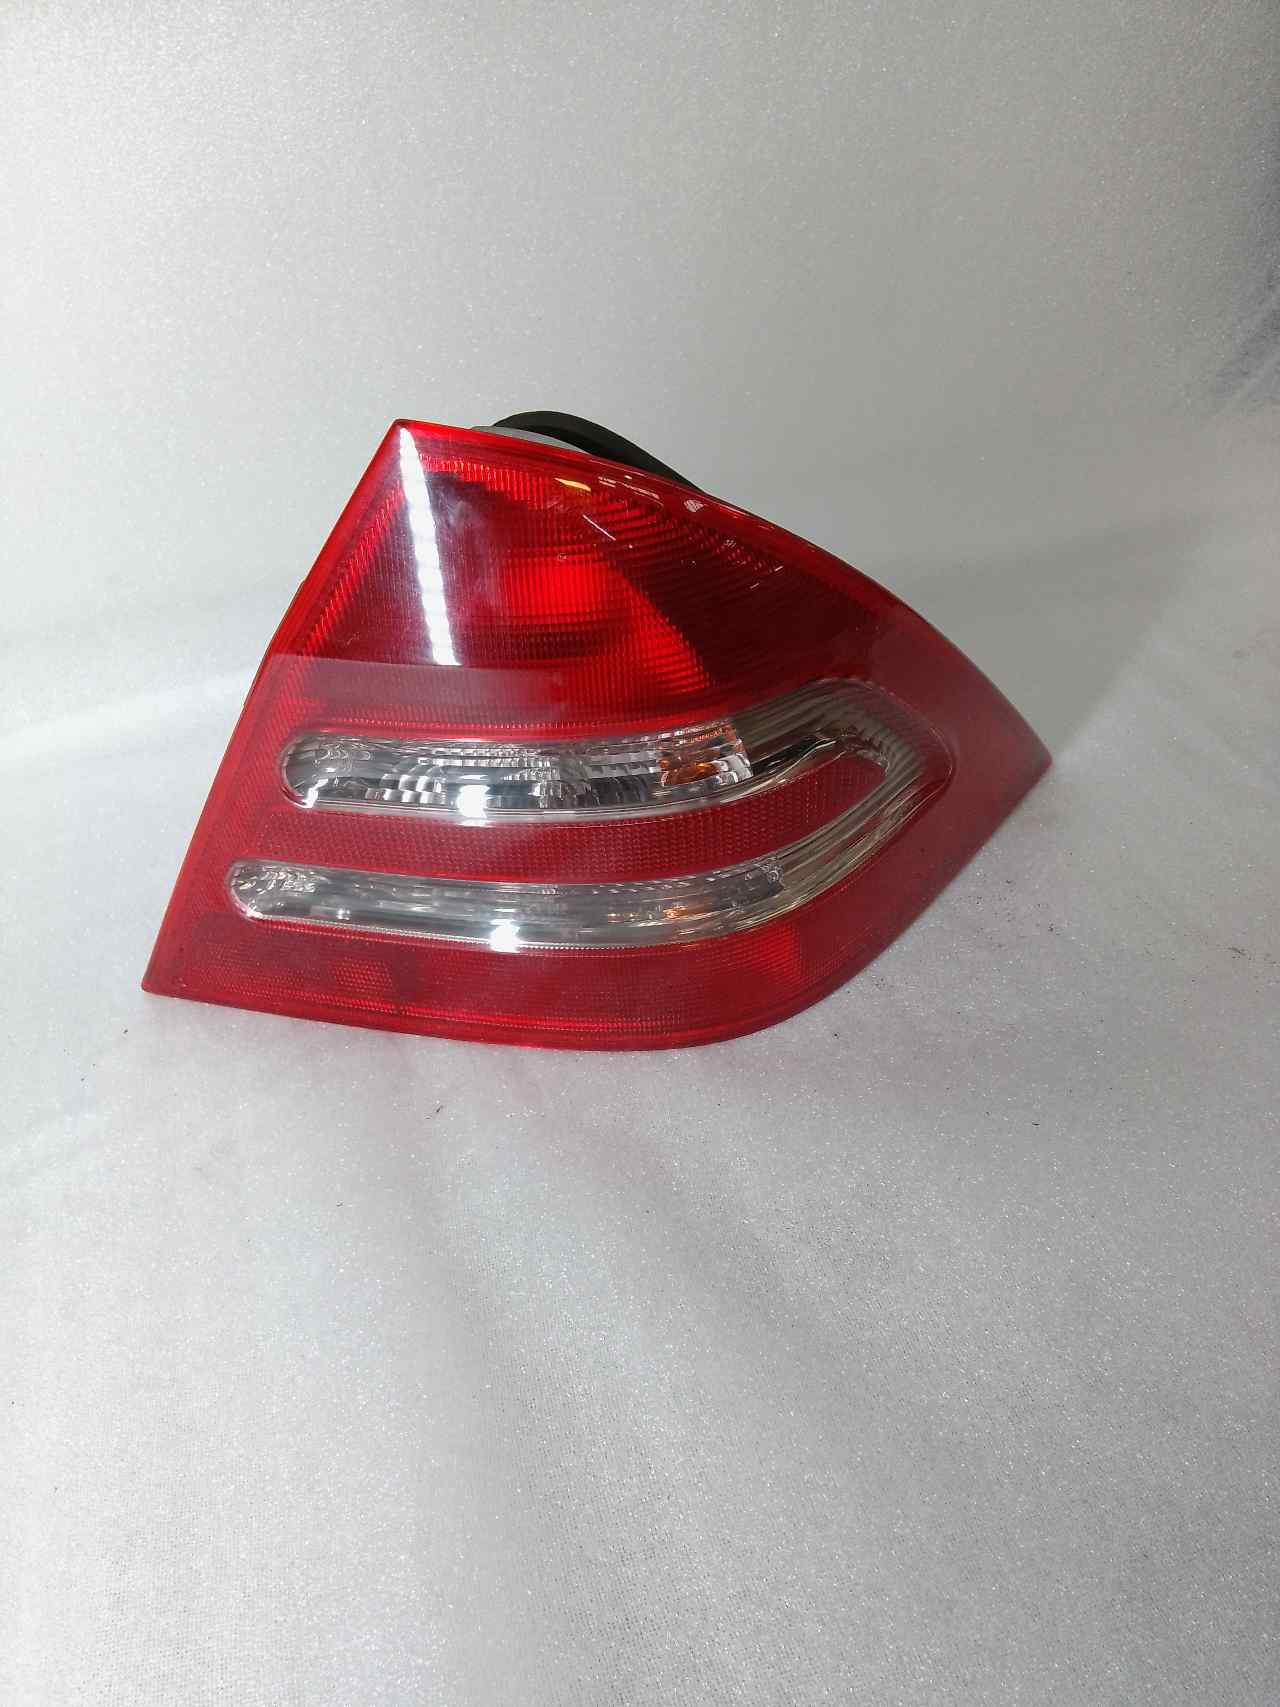 MERCEDES-BENZ C-Class W203/S203/CL203 (2000-2008) Rear Right Taillight Lamp 2038200264R 20083830